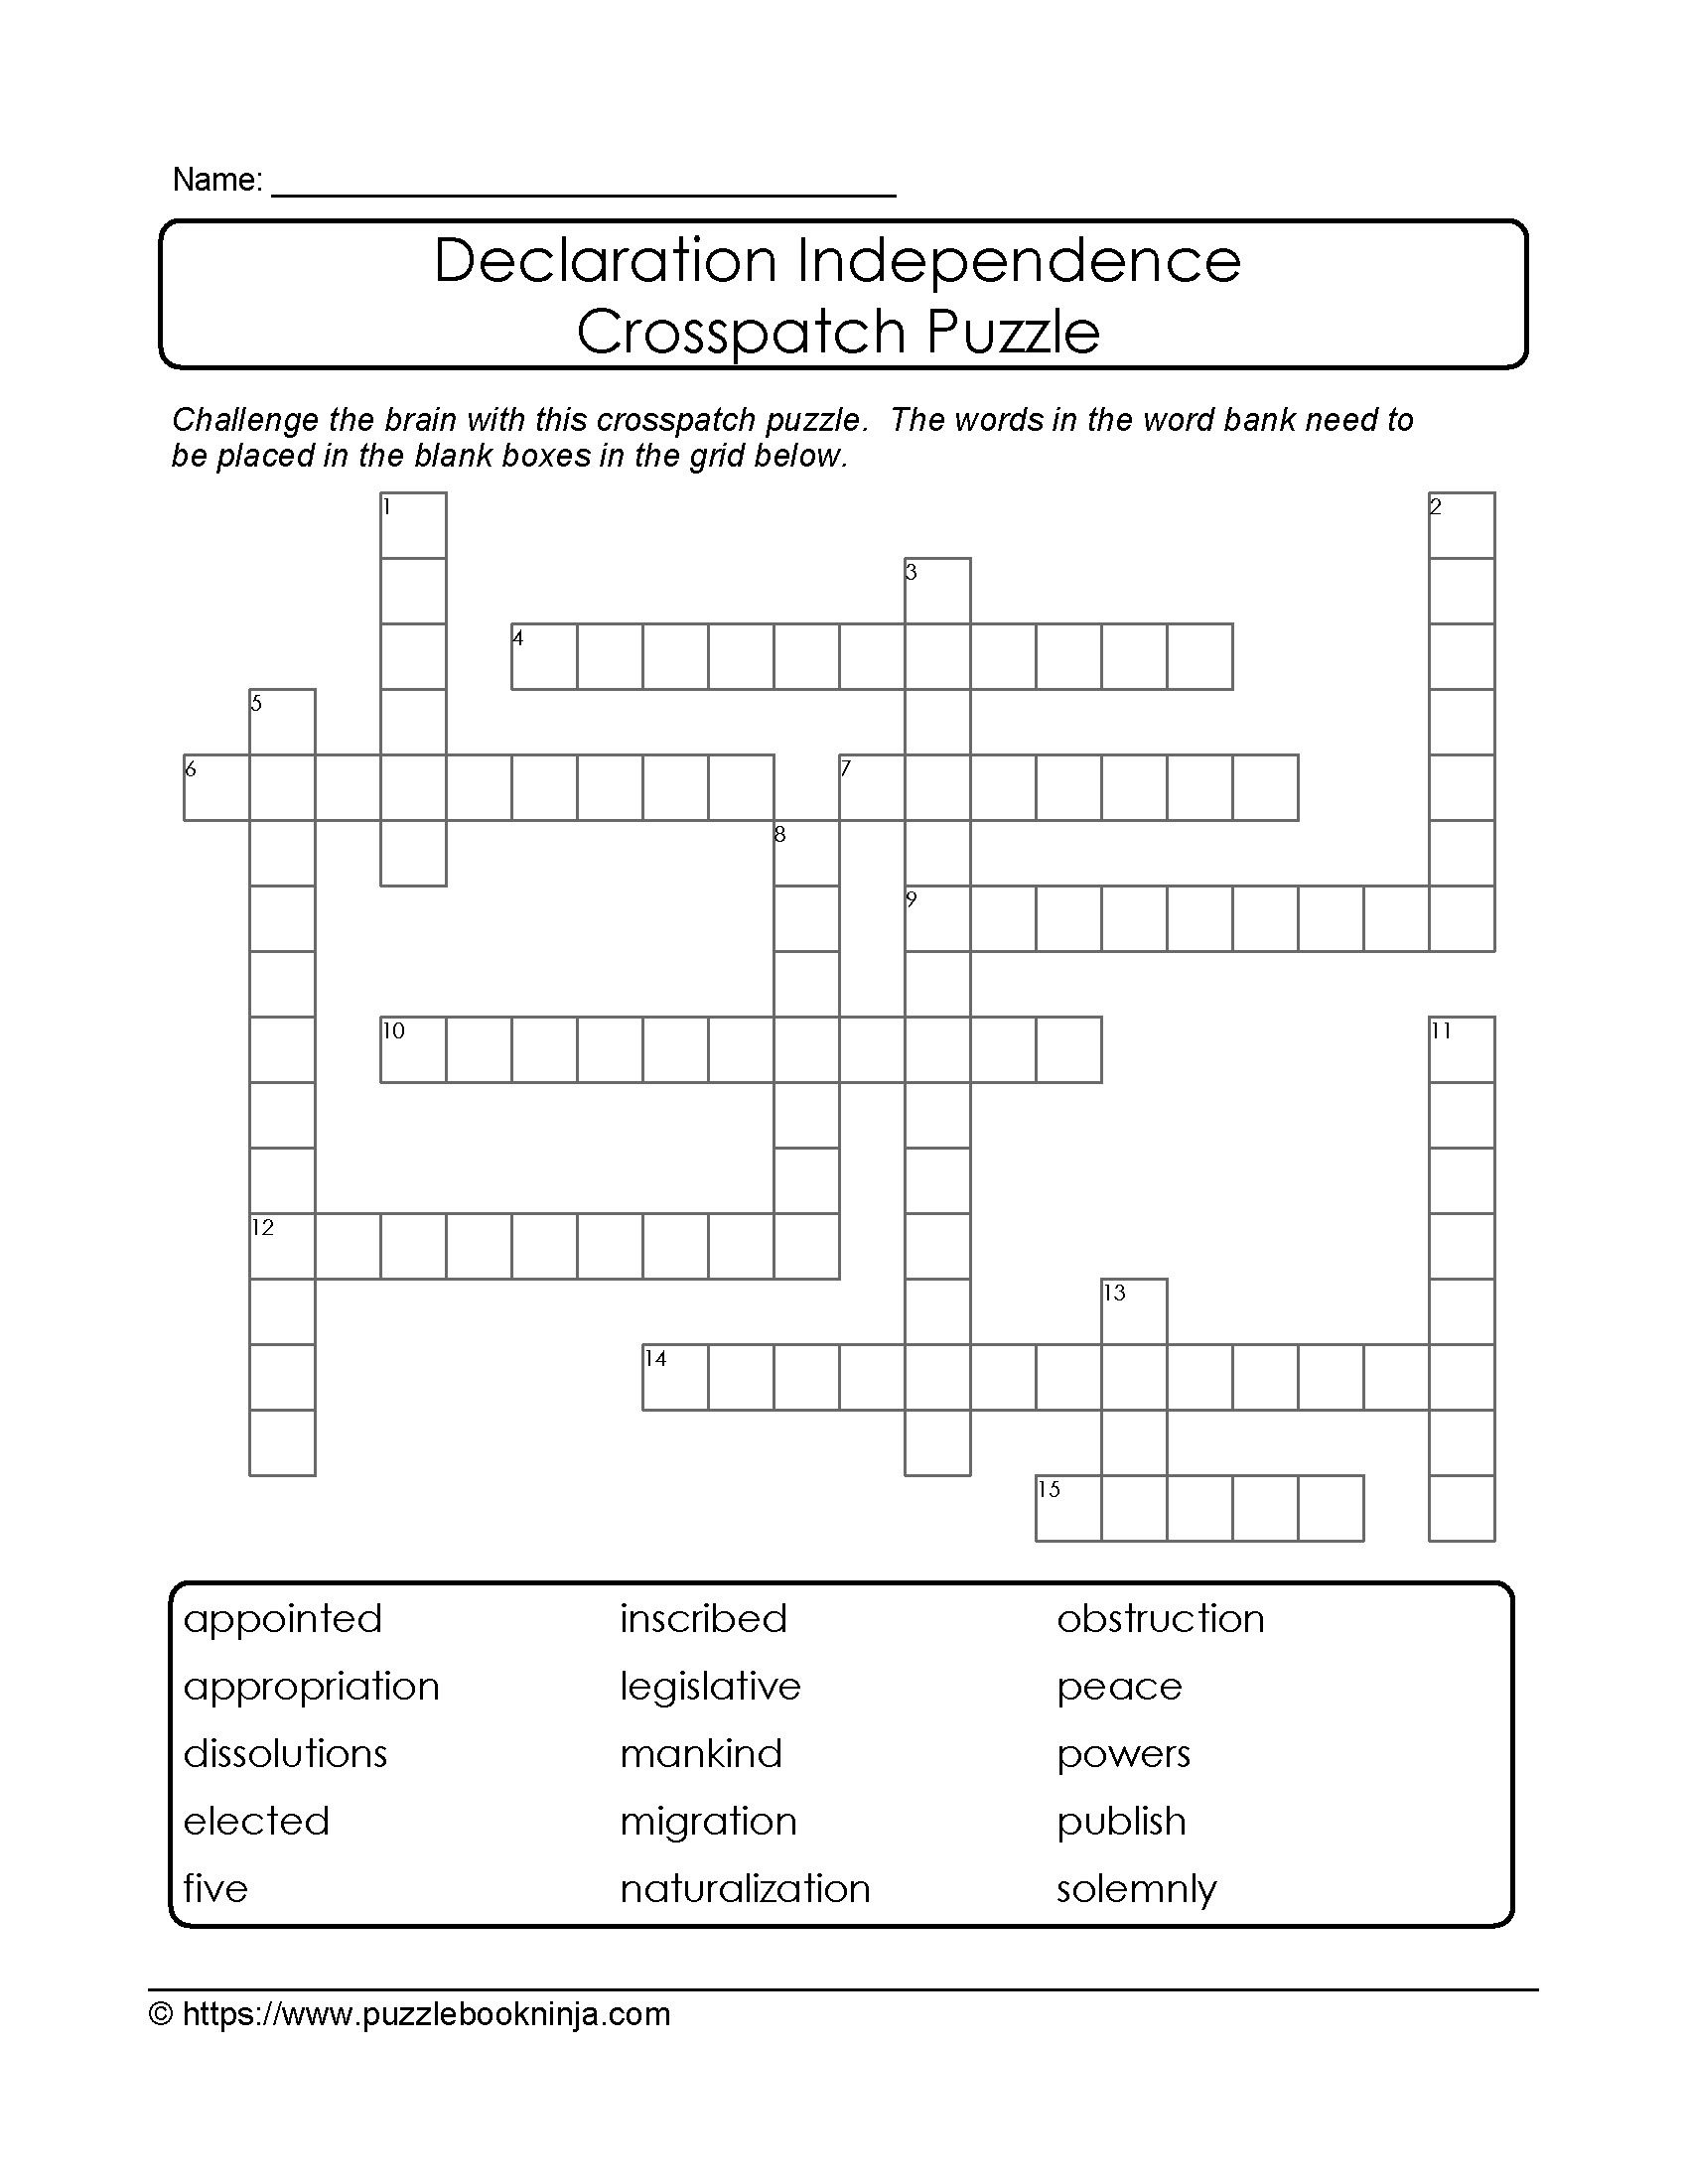 Crosspatch Declaration Independence Puzzle. Free